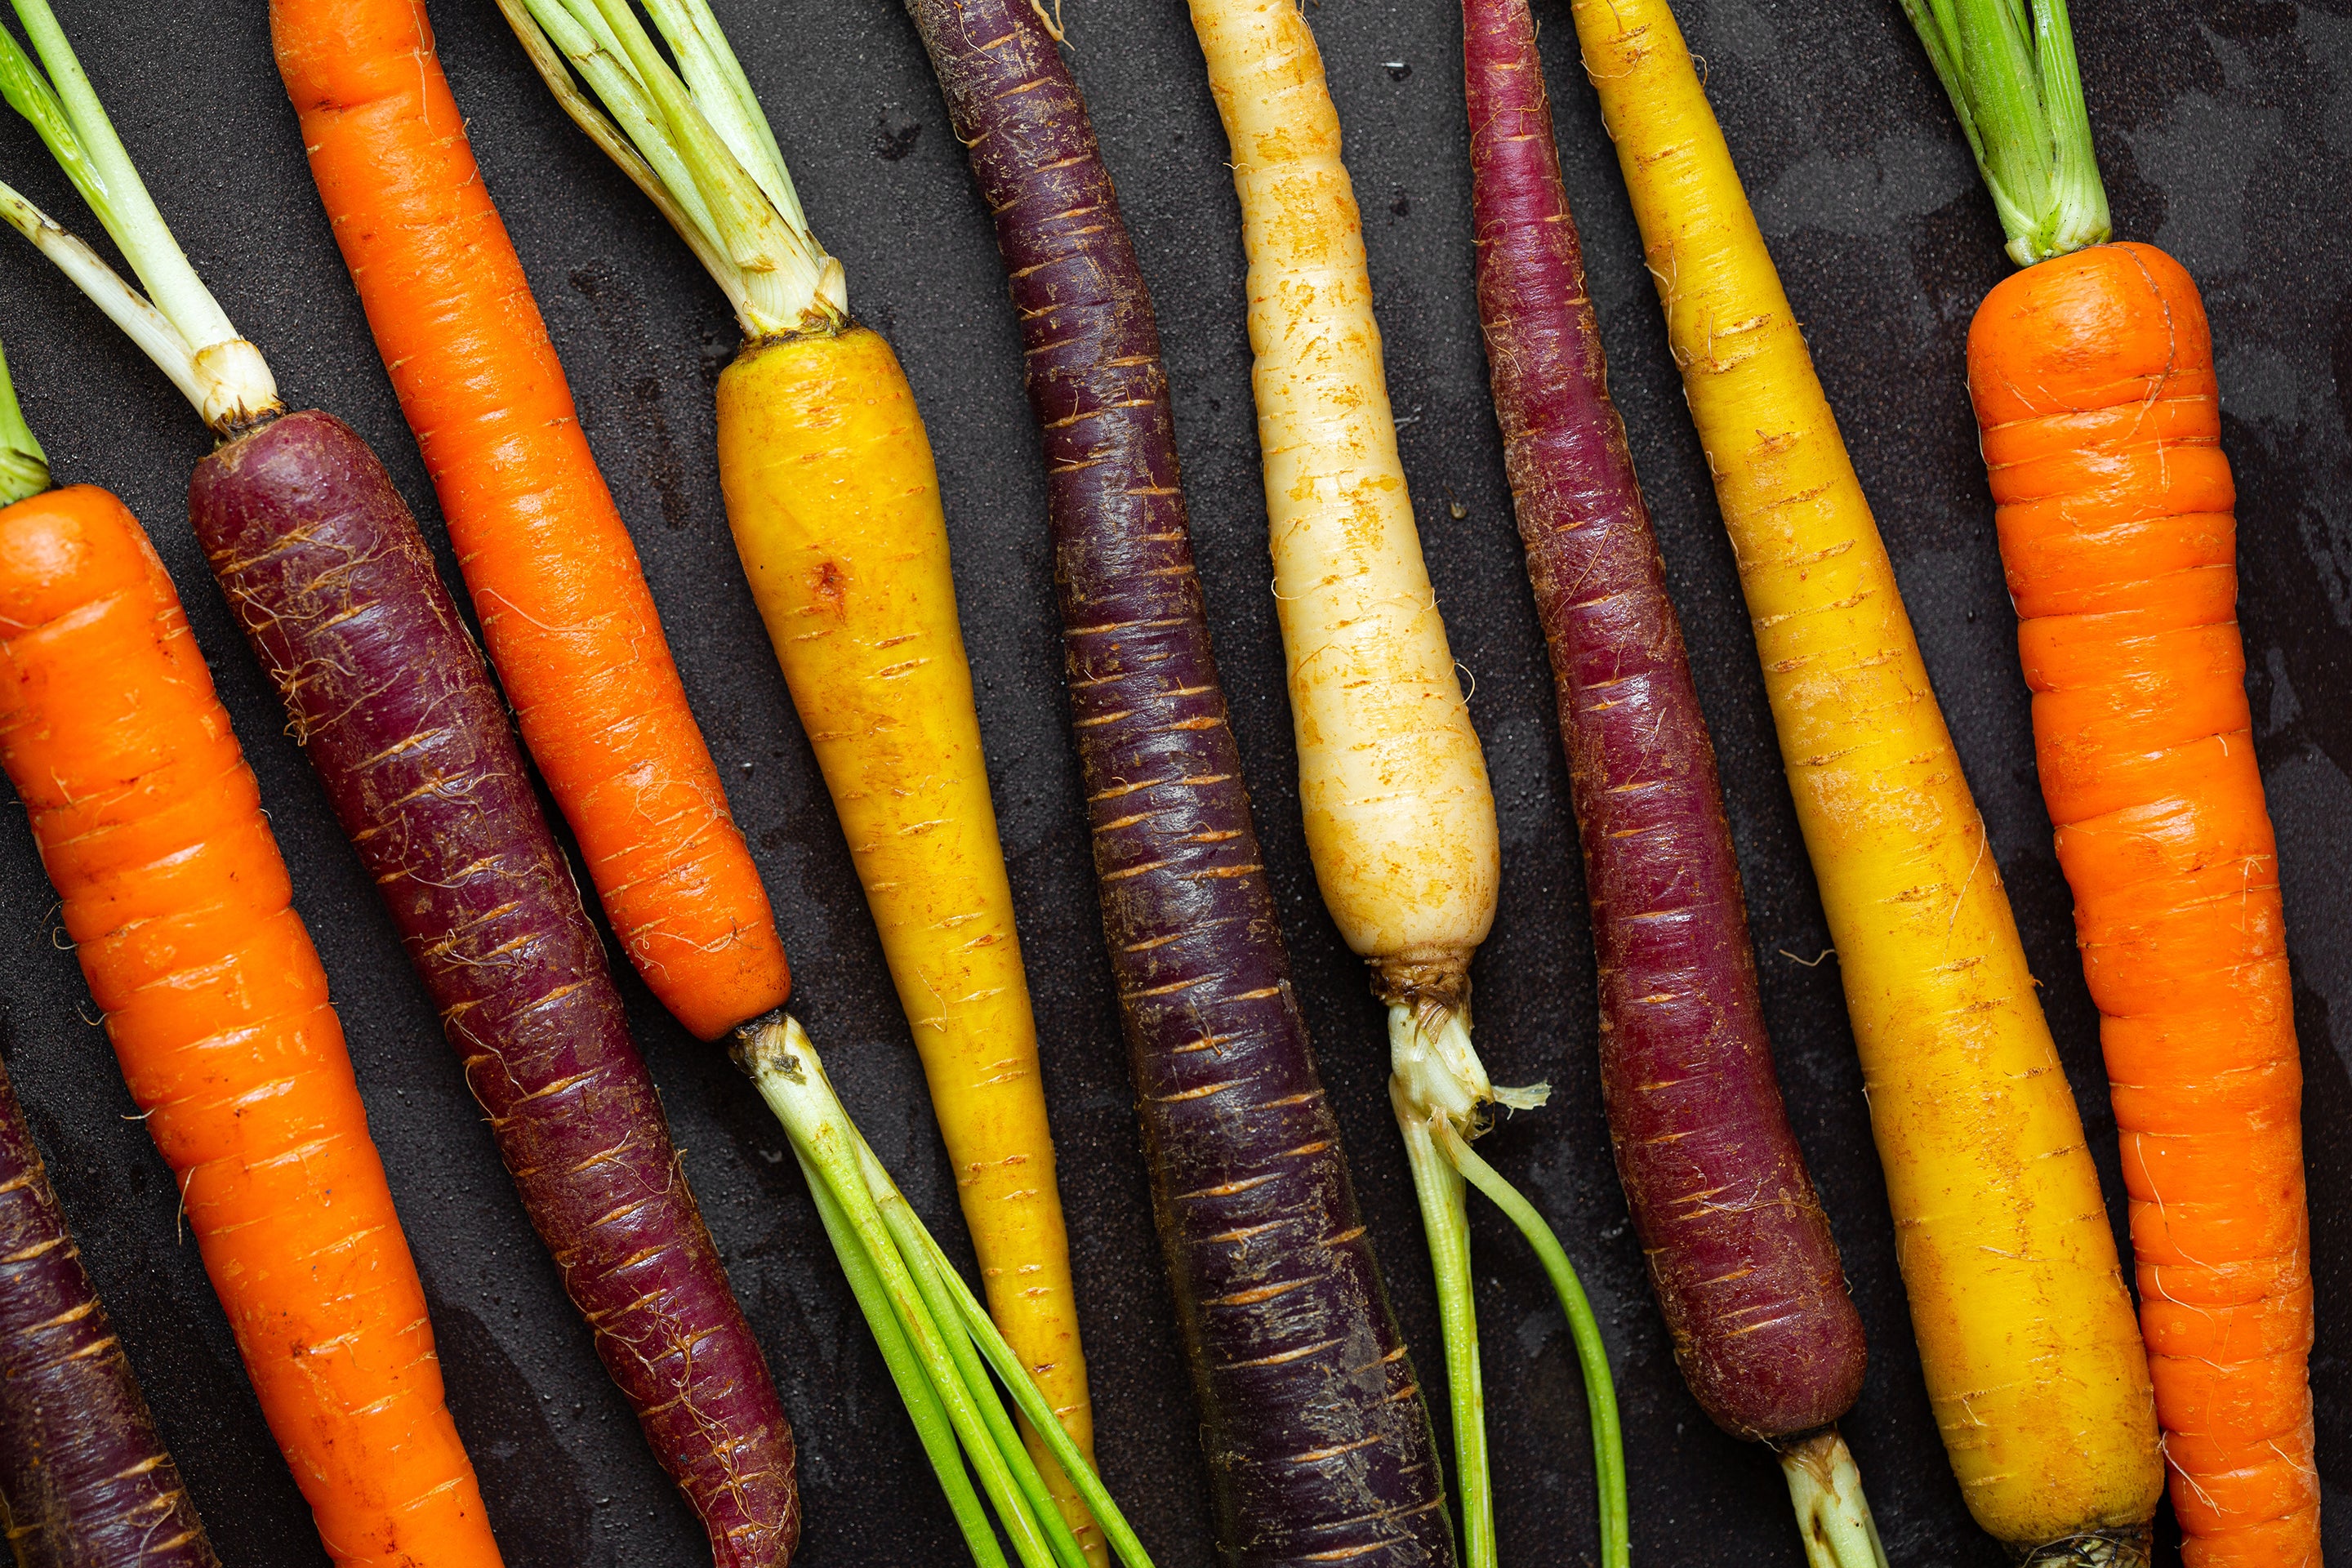 Fresh, colorful carrots used in Kekoa Foods organic baby food pouches.